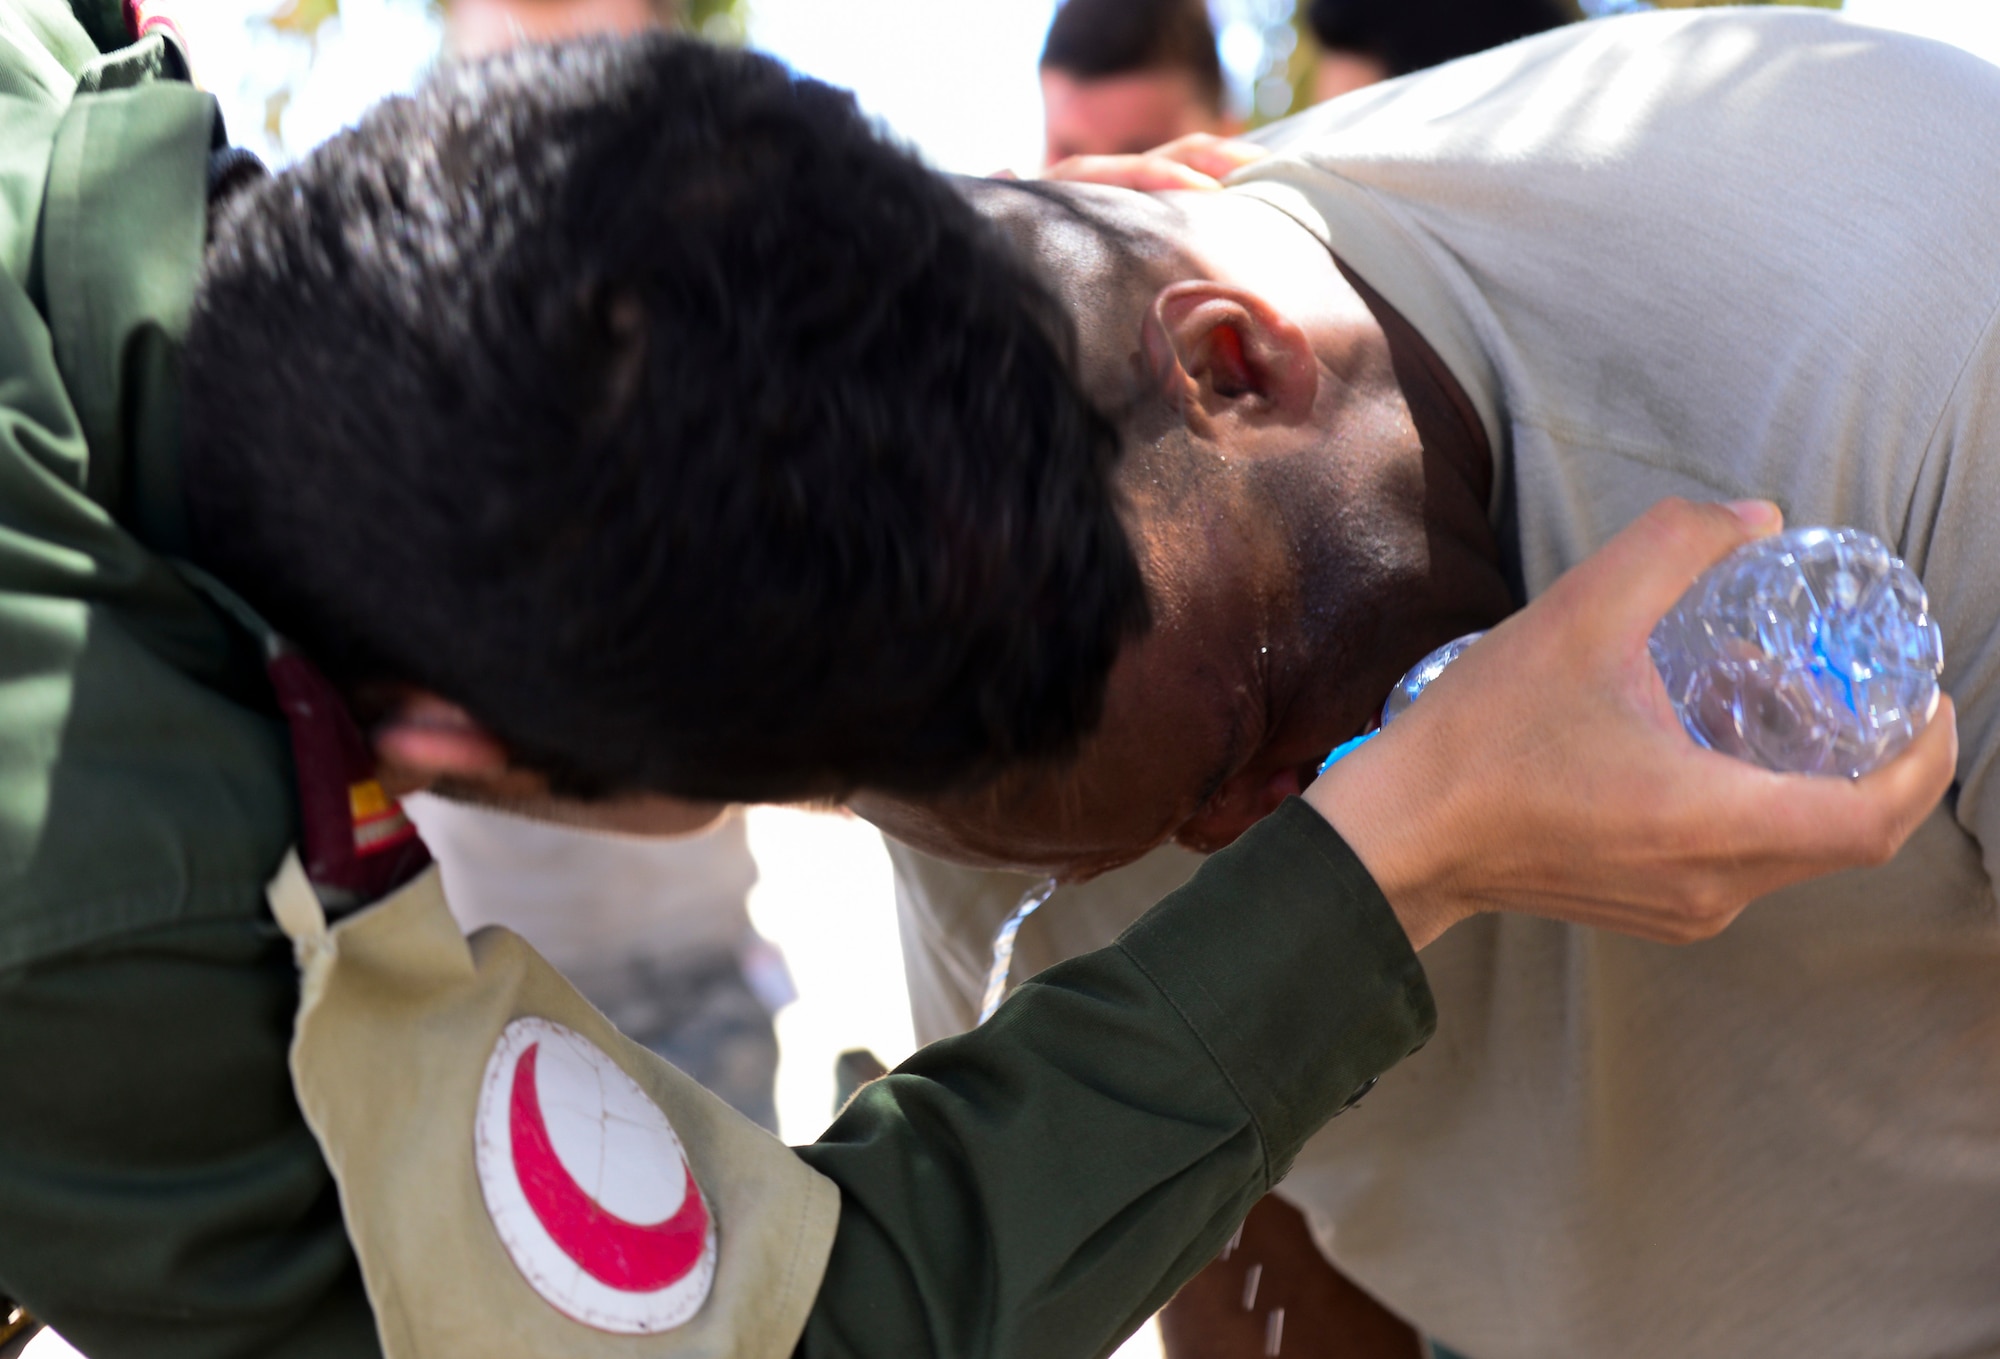 A Royal Moroccan Armed Forces medic pours water on U.S. Air Force Tech. Sgt. Kevin Foster, 403rd Security Forces Squadron security force member, after he received a level one exposure to Oleoresin Capsicum pepper spray as part of a non-lethal weapons course during AFRICAN LION 16 at Tifnit, Kingdom of Morocco, April 23, 2016. Foster is one of twenty Air Force Reservists and Guardsmen participating in the annual exercise. (U.S. Air Force photo by Senior Airman Krystal Ardrey/Released)